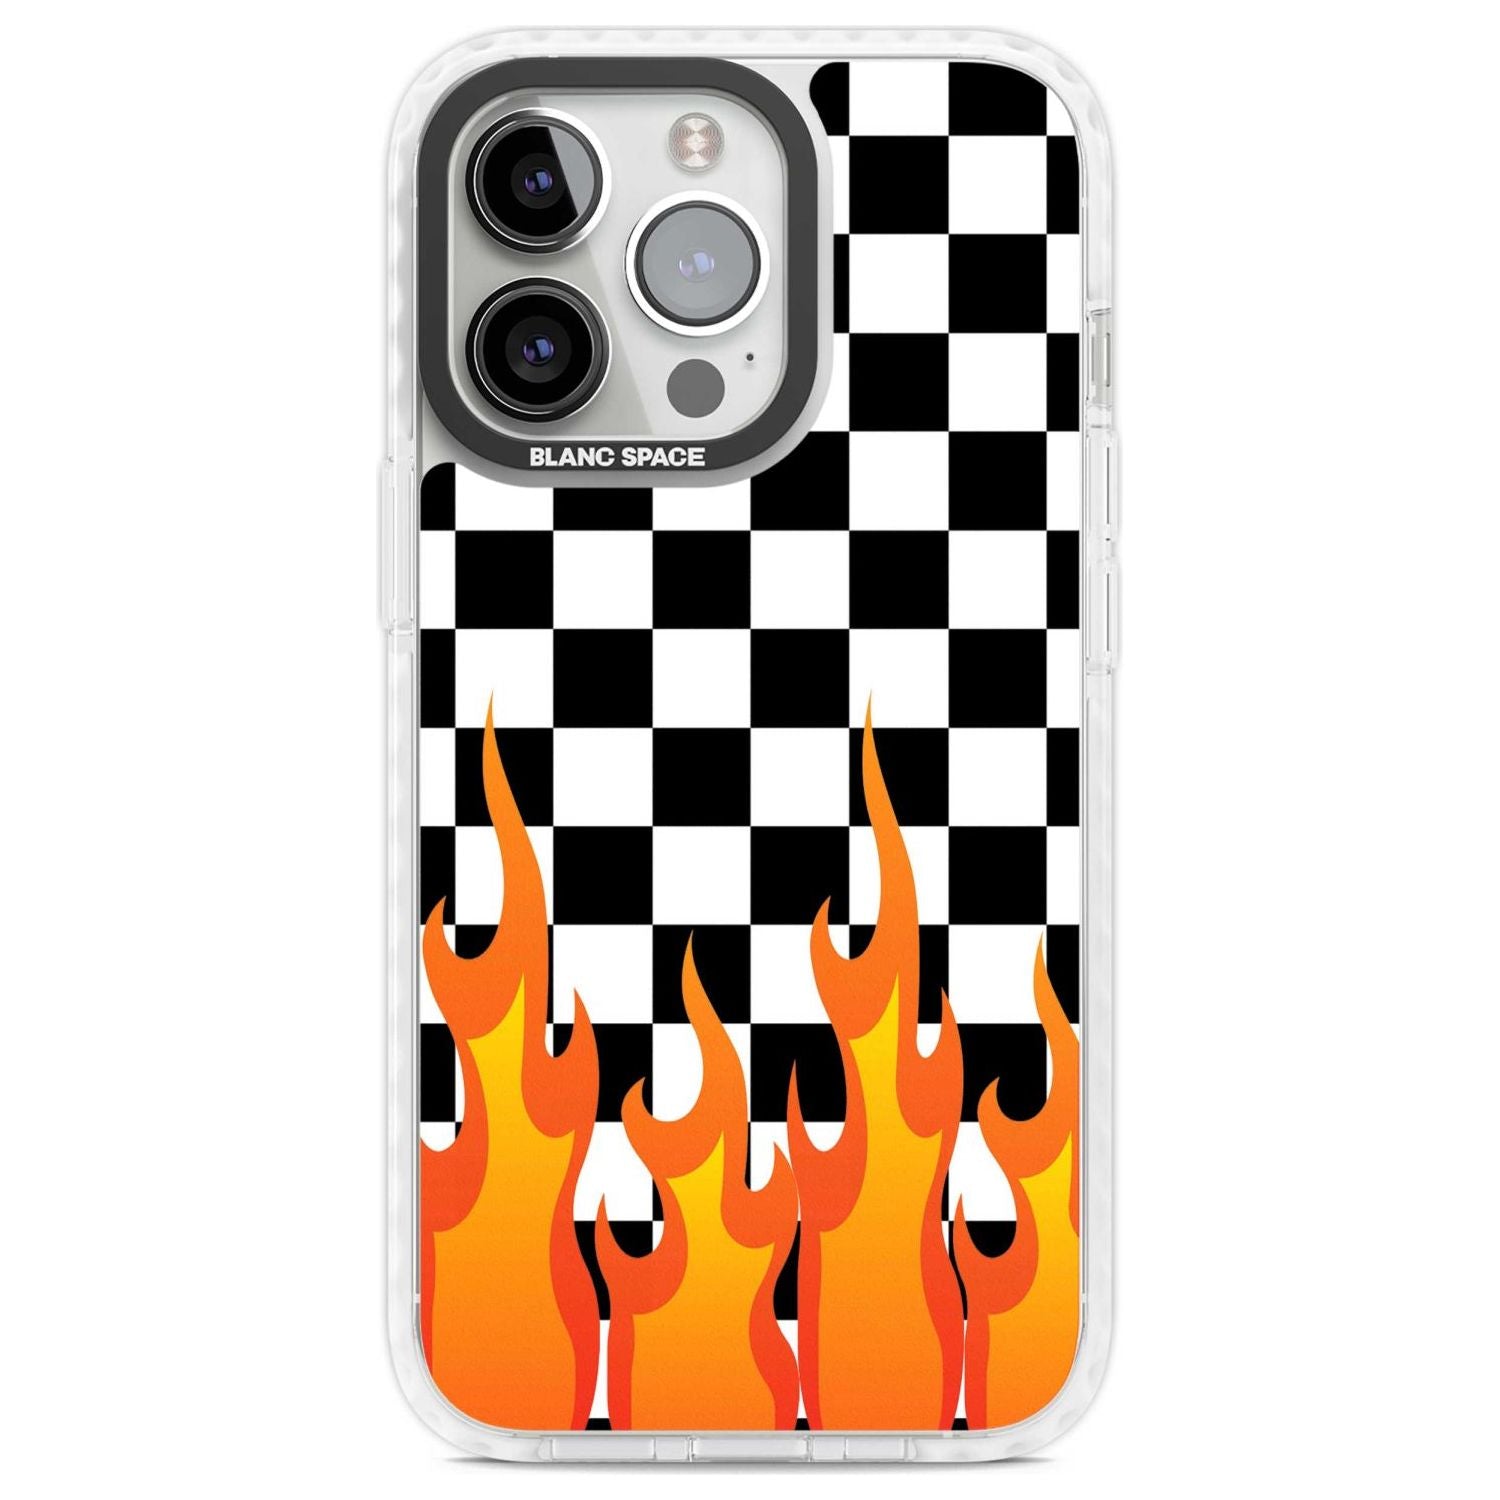 Checkered Fire Phone Case iPhone 15 Pro Max / Magsafe Impact Case,iPhone 15 Plus / Magsafe Impact Case,iPhone 15 Pro / Magsafe Impact Case,iPhone 15 / Magsafe Impact Case Blanc Space